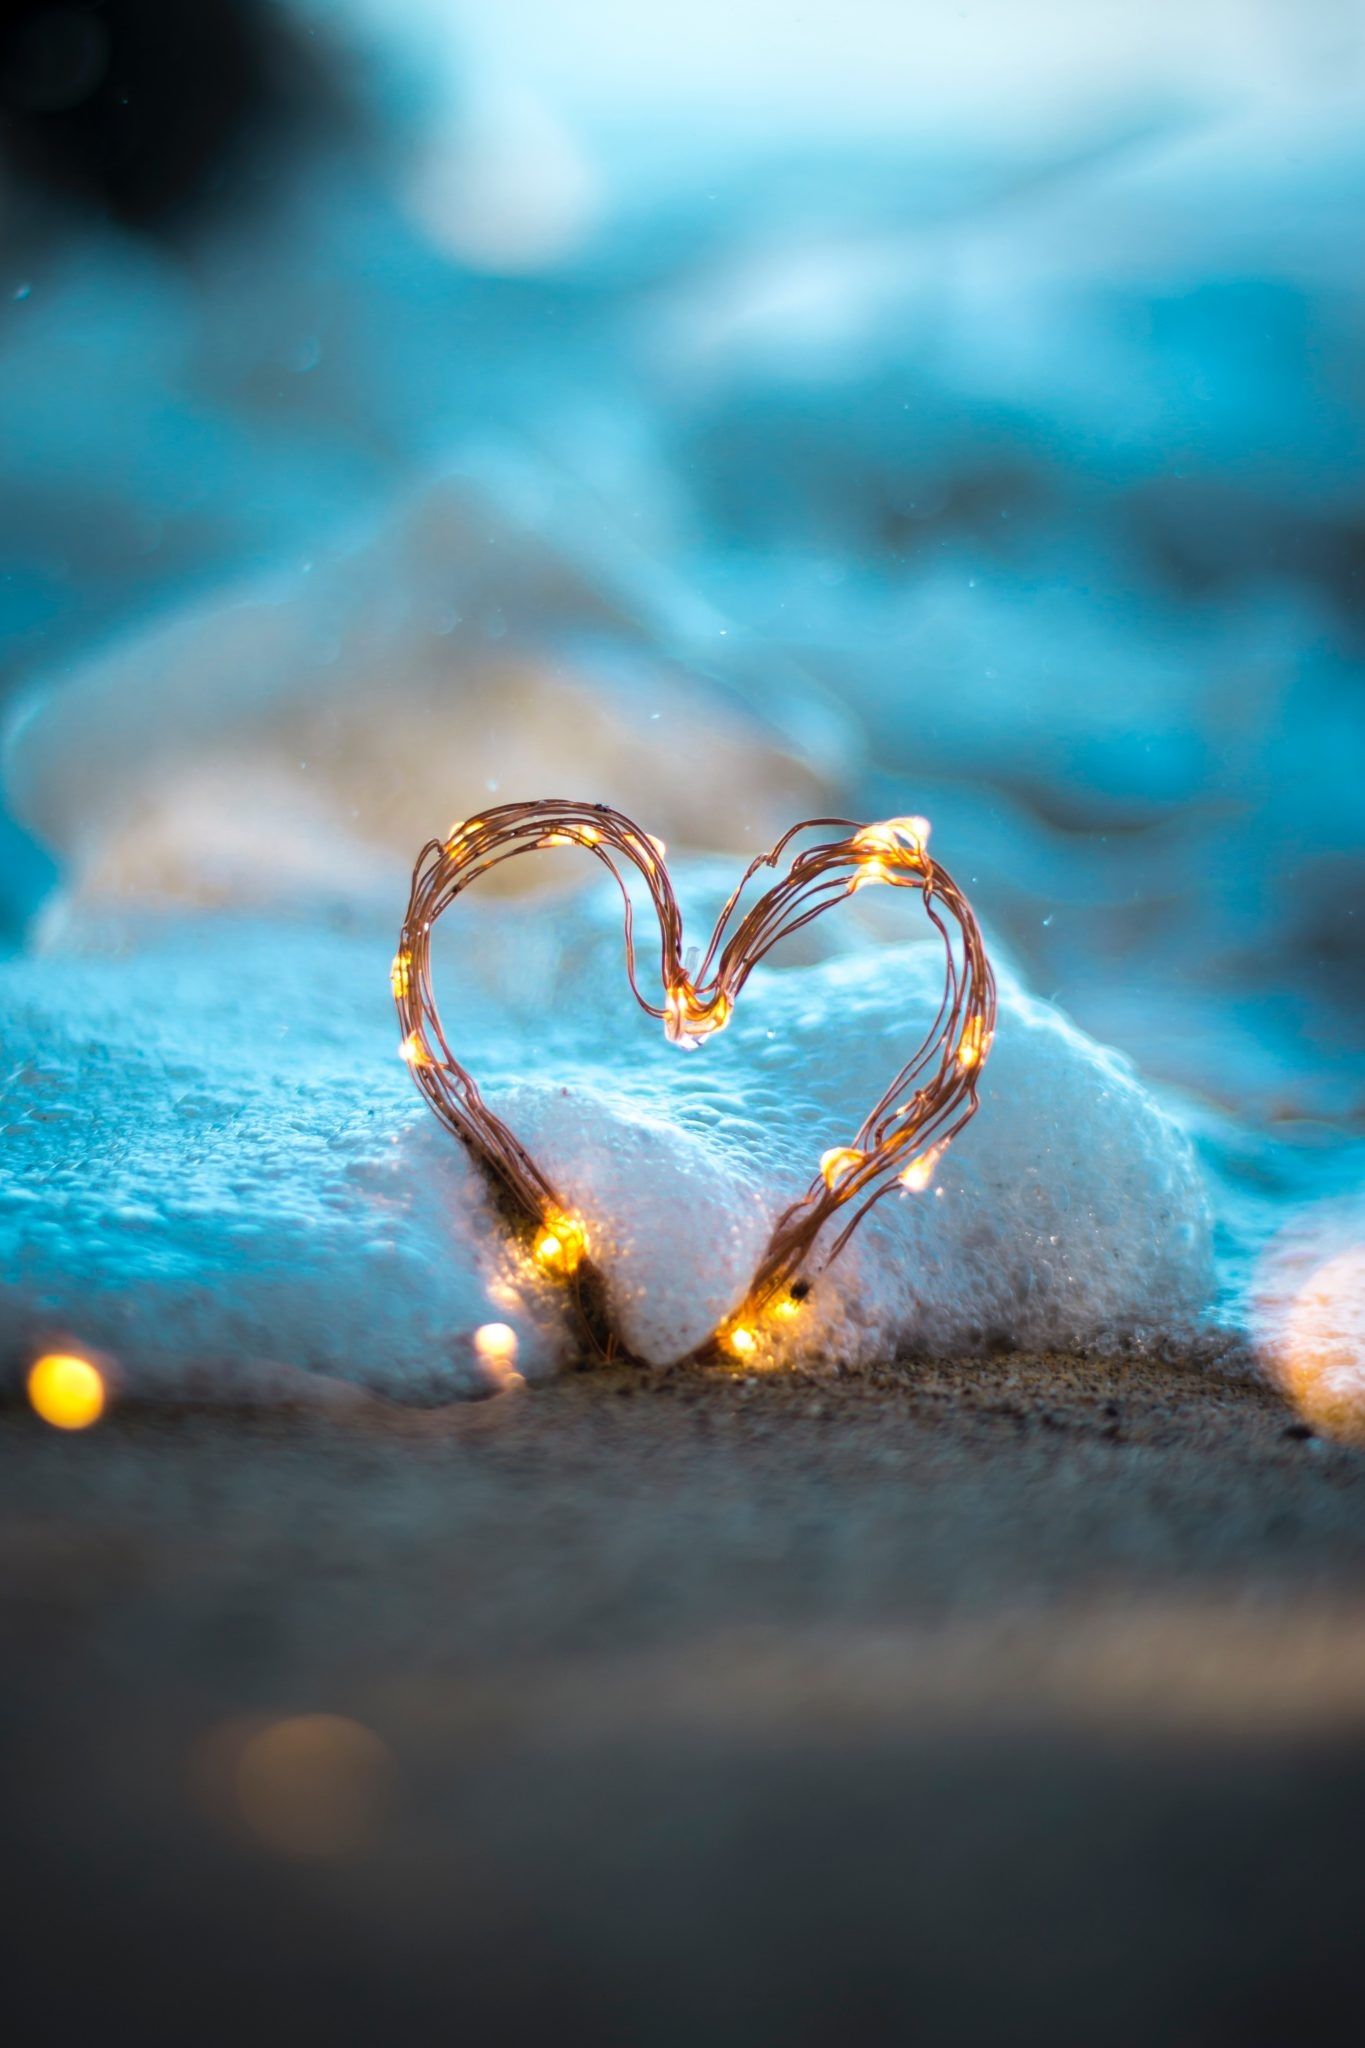 A heart made of string lights on a blanket of snow - Heart